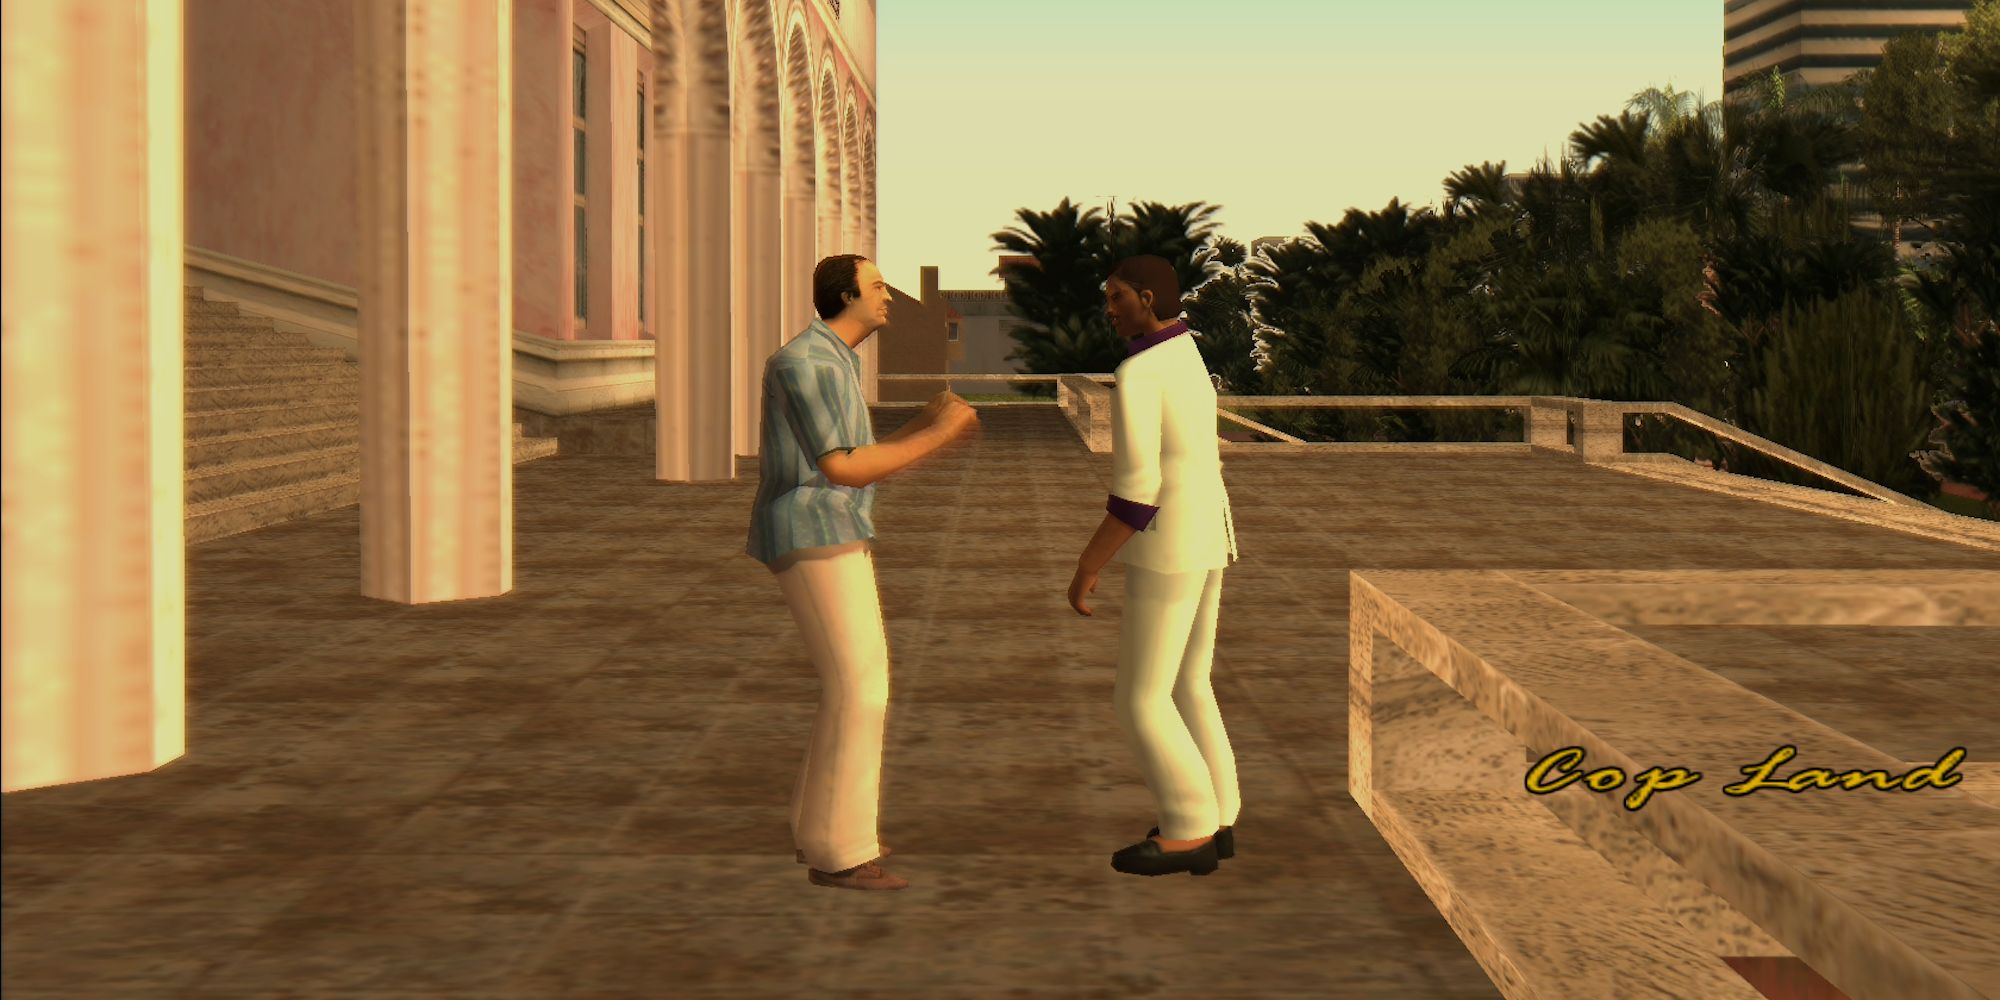 vice city cop land mission briefing